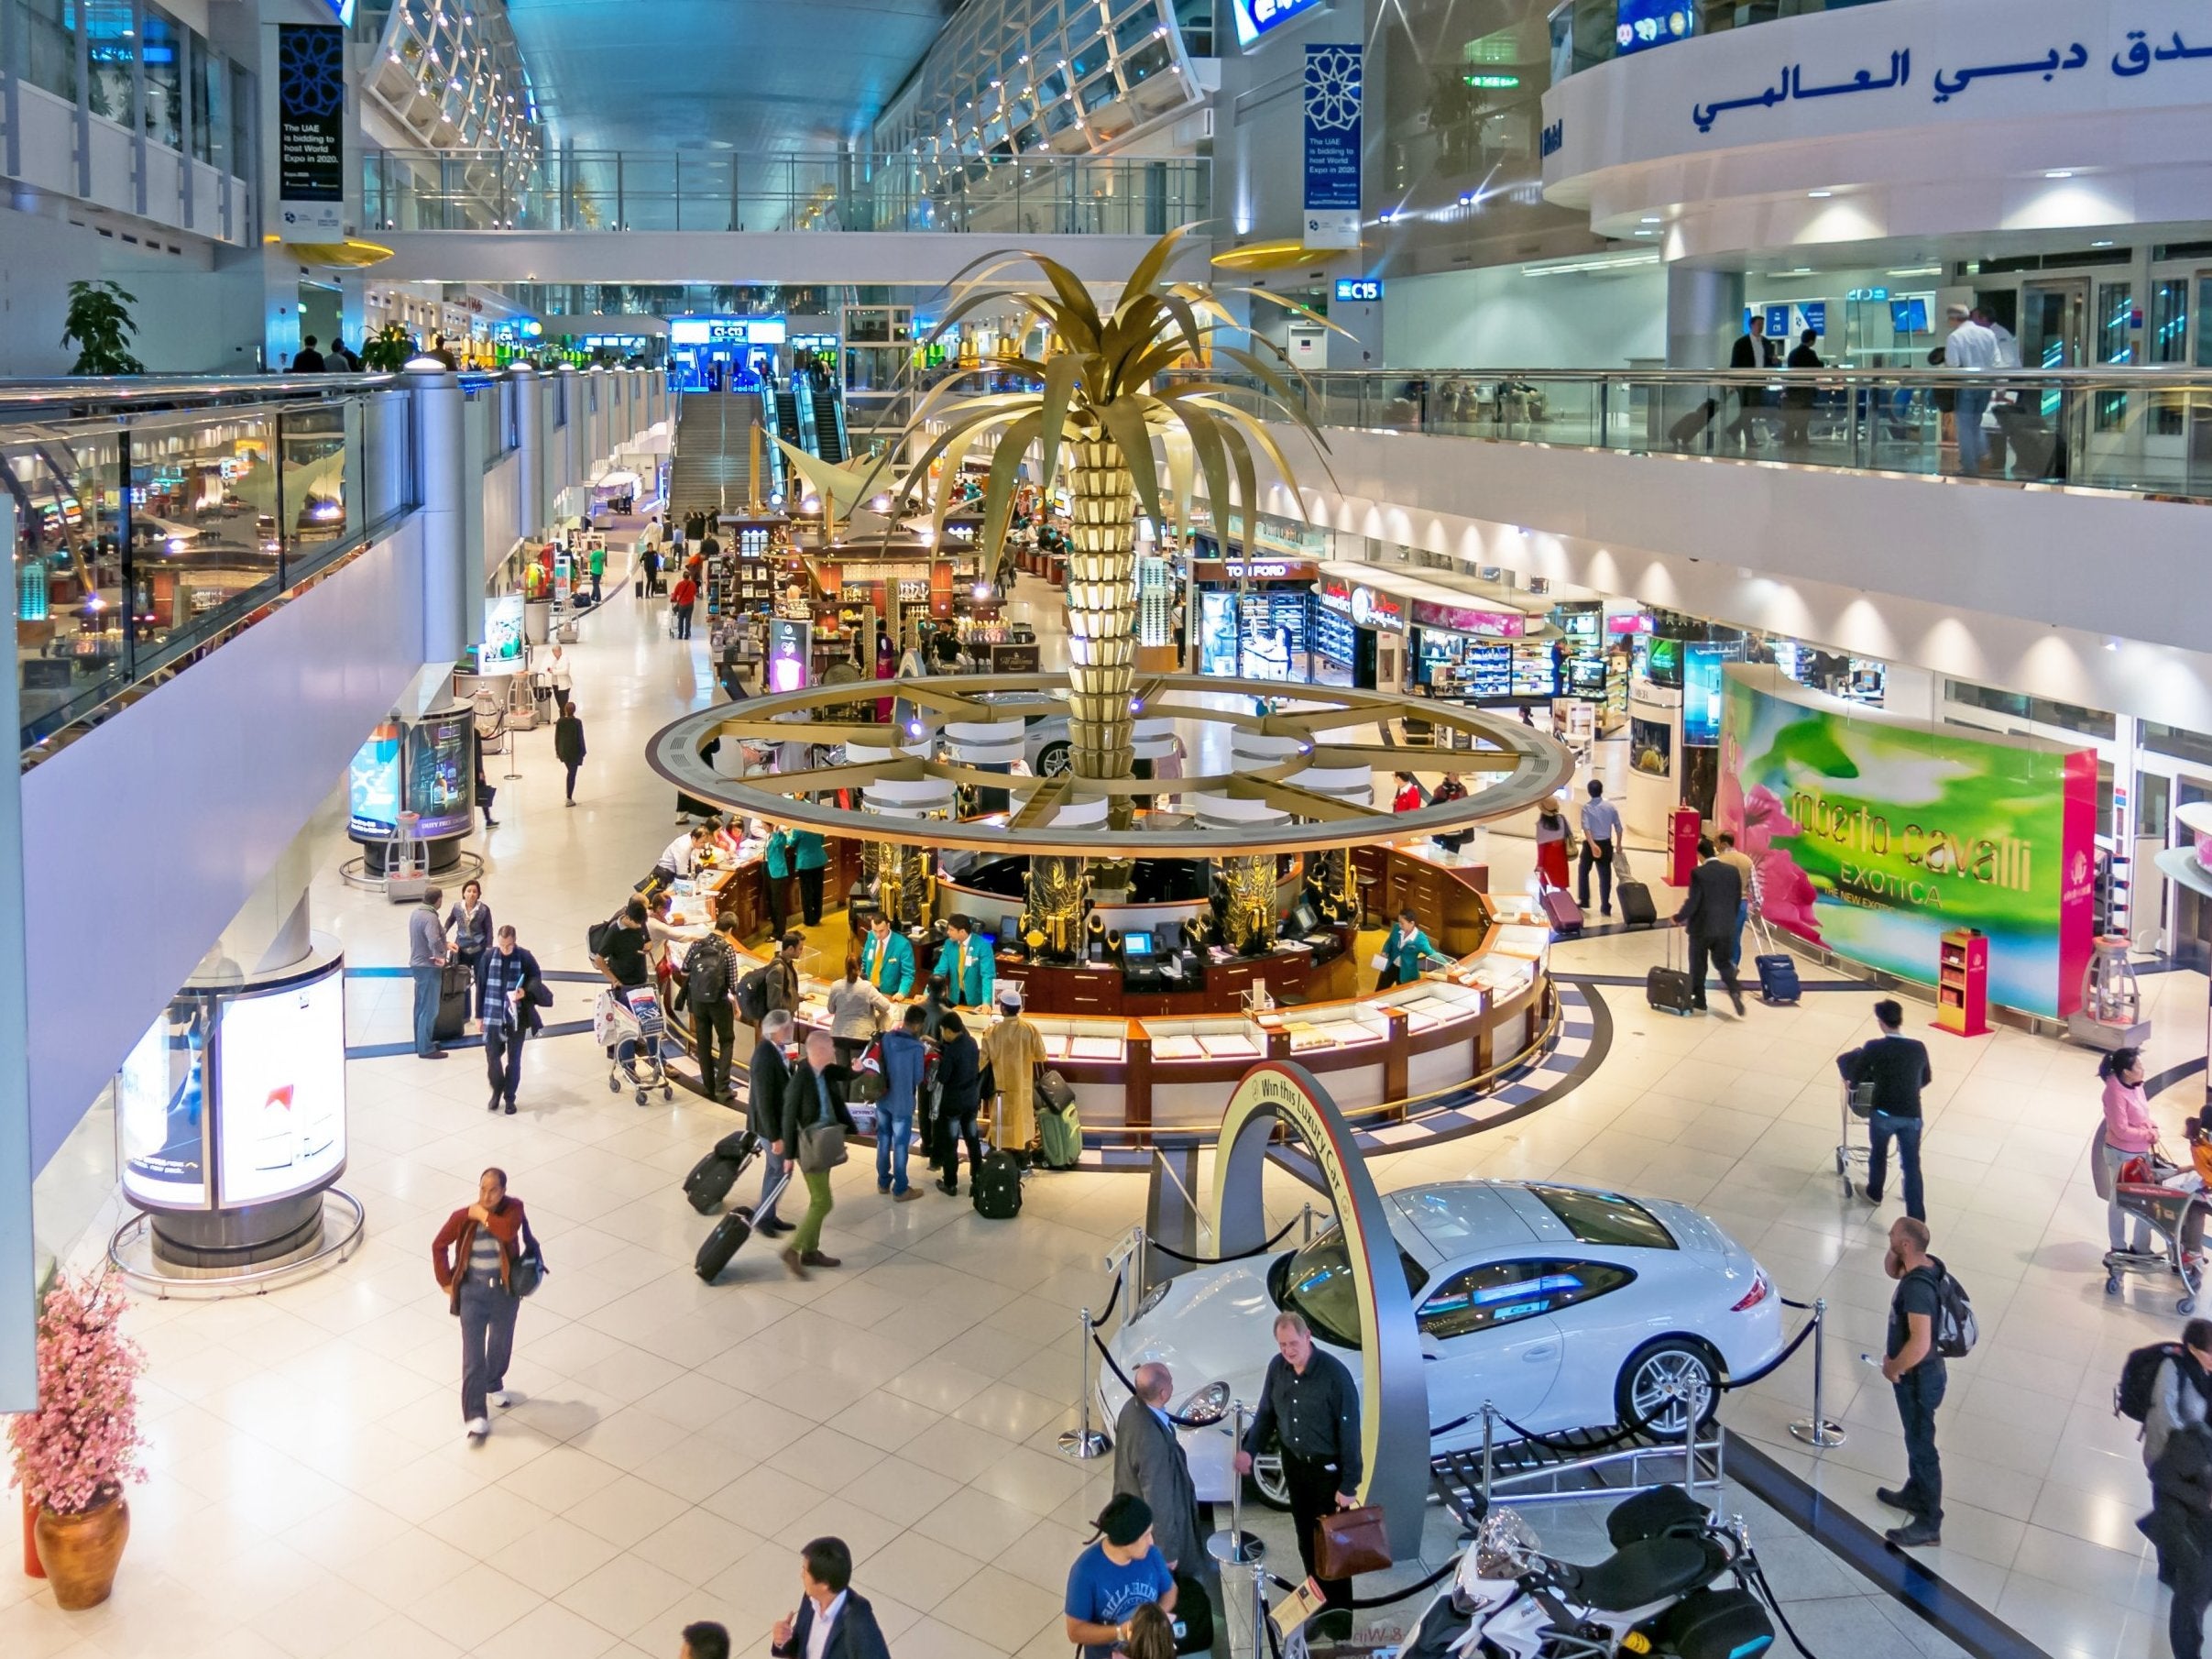 As one of the world’s busiest airports, Dubai has plenty of experience in making connections as quick and hassle-free as possible